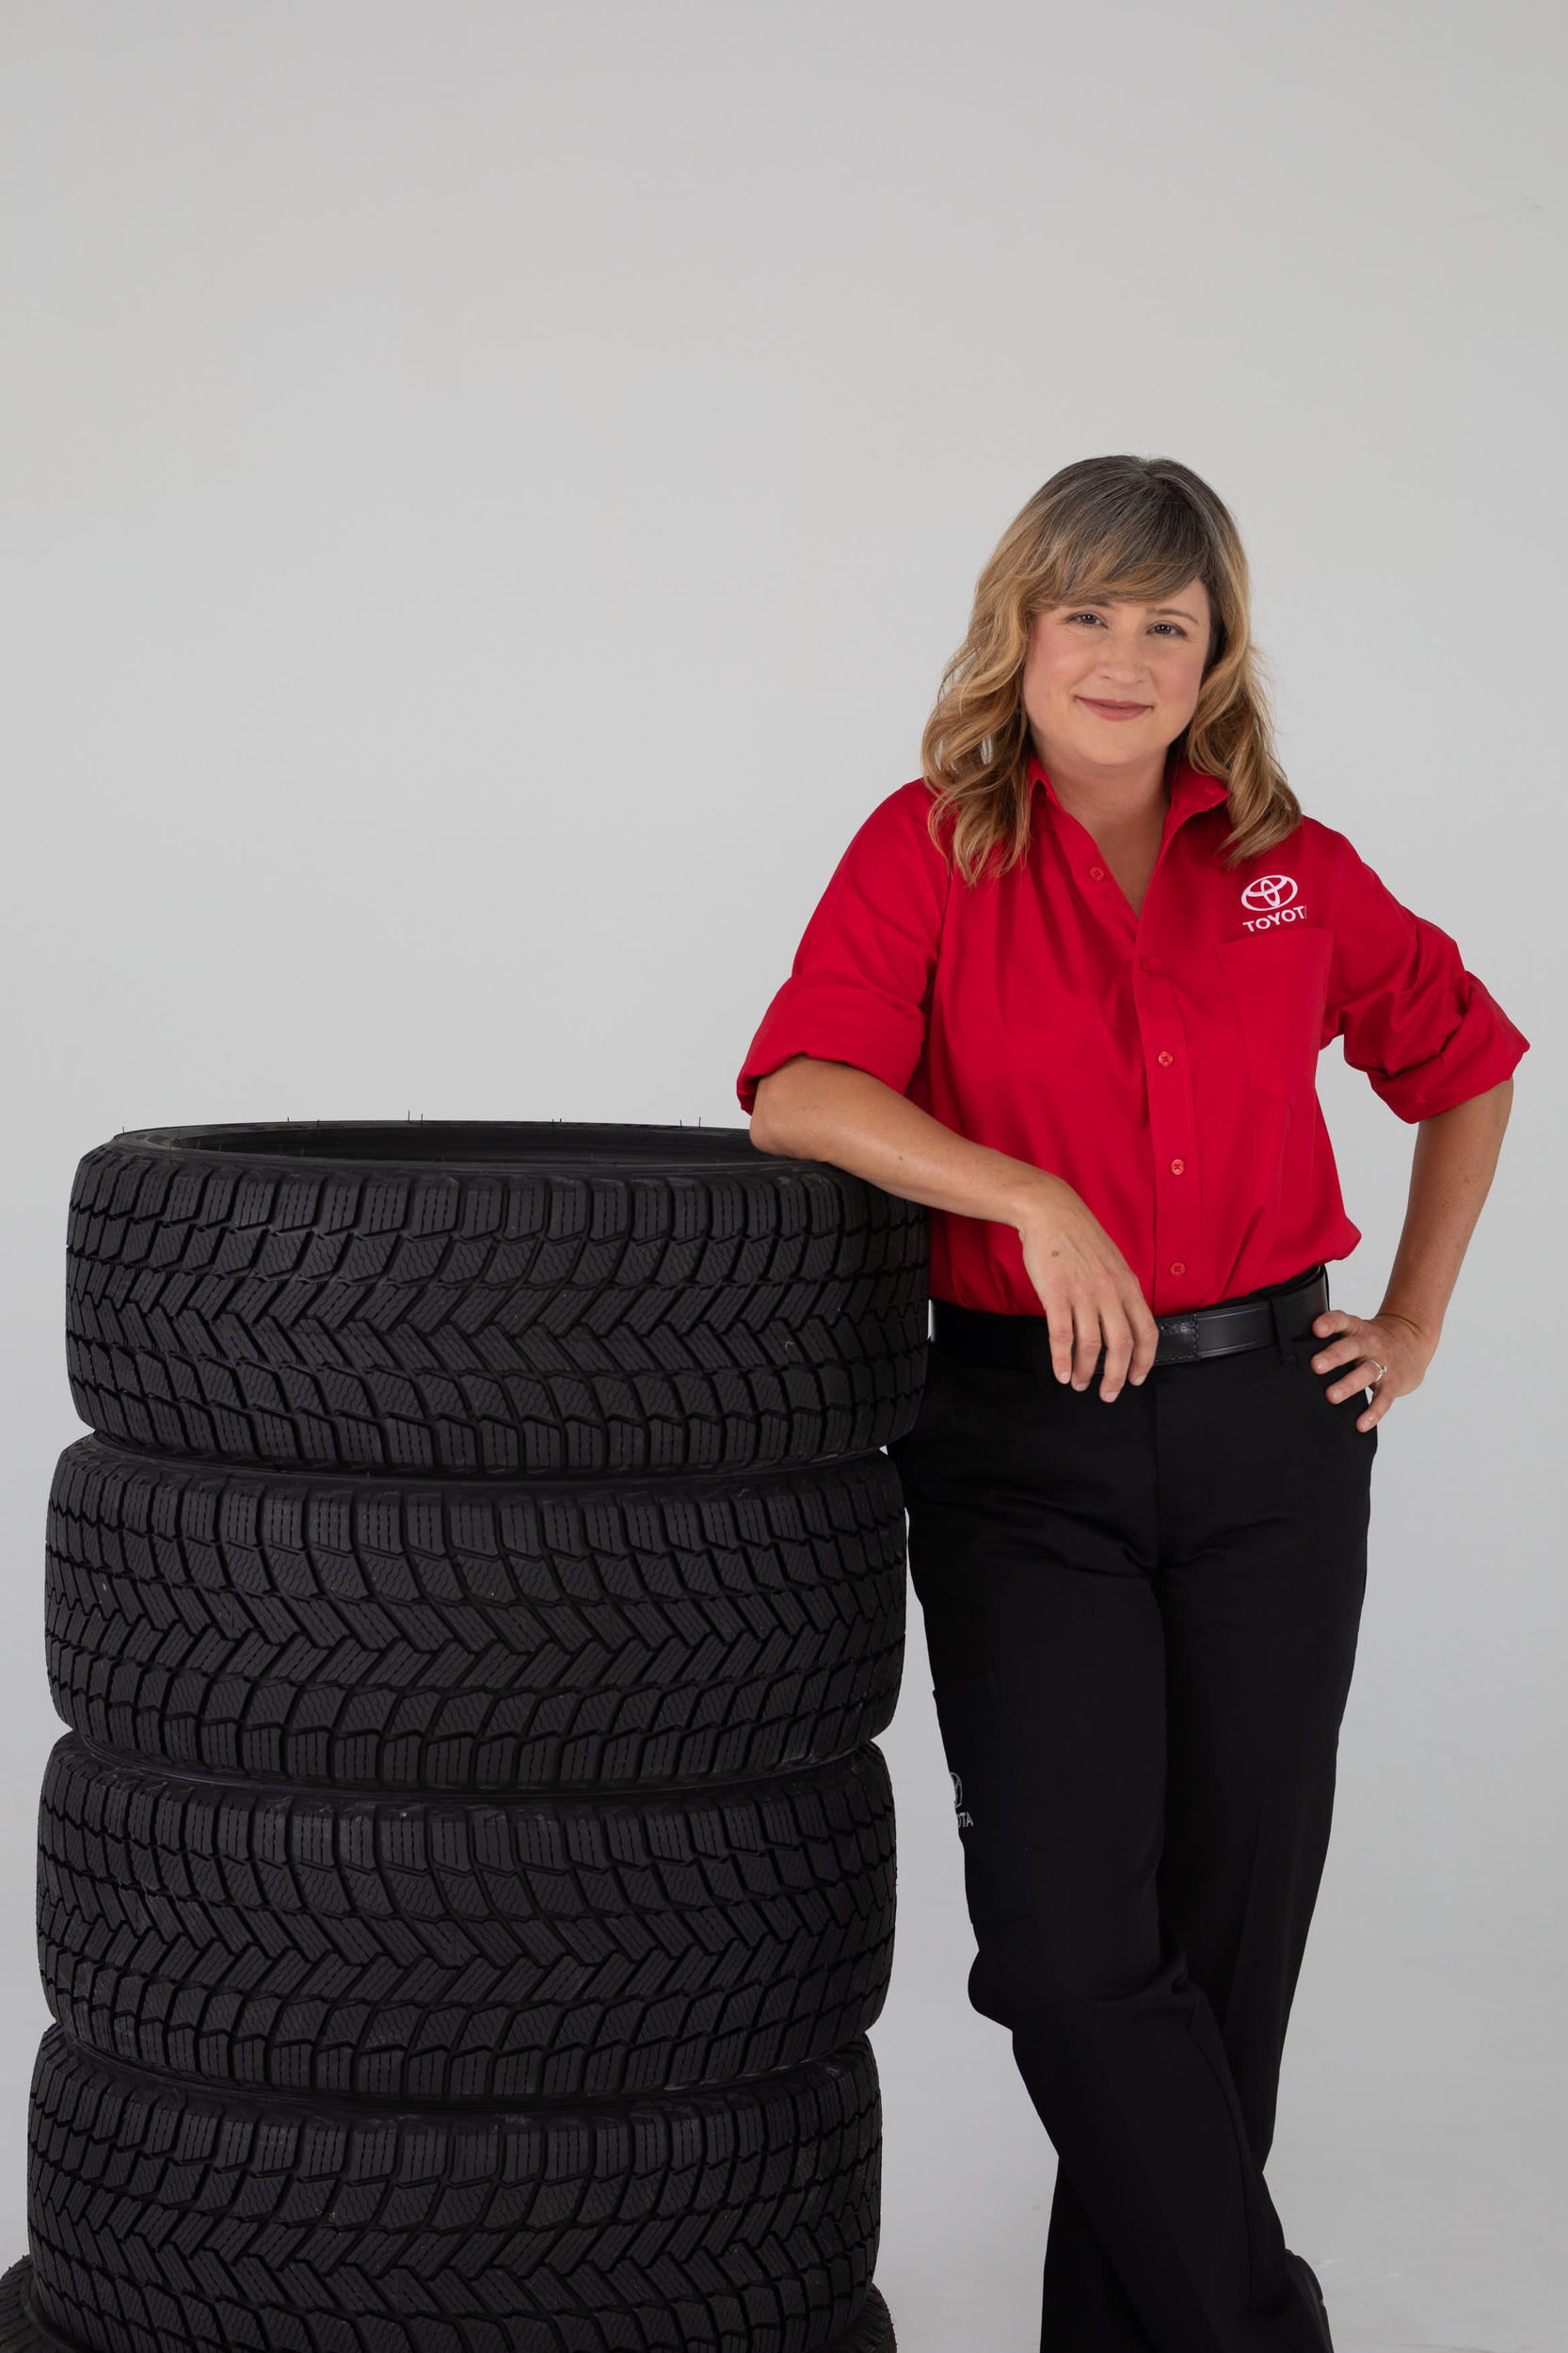 Winter, Summer, and All-Season Tires